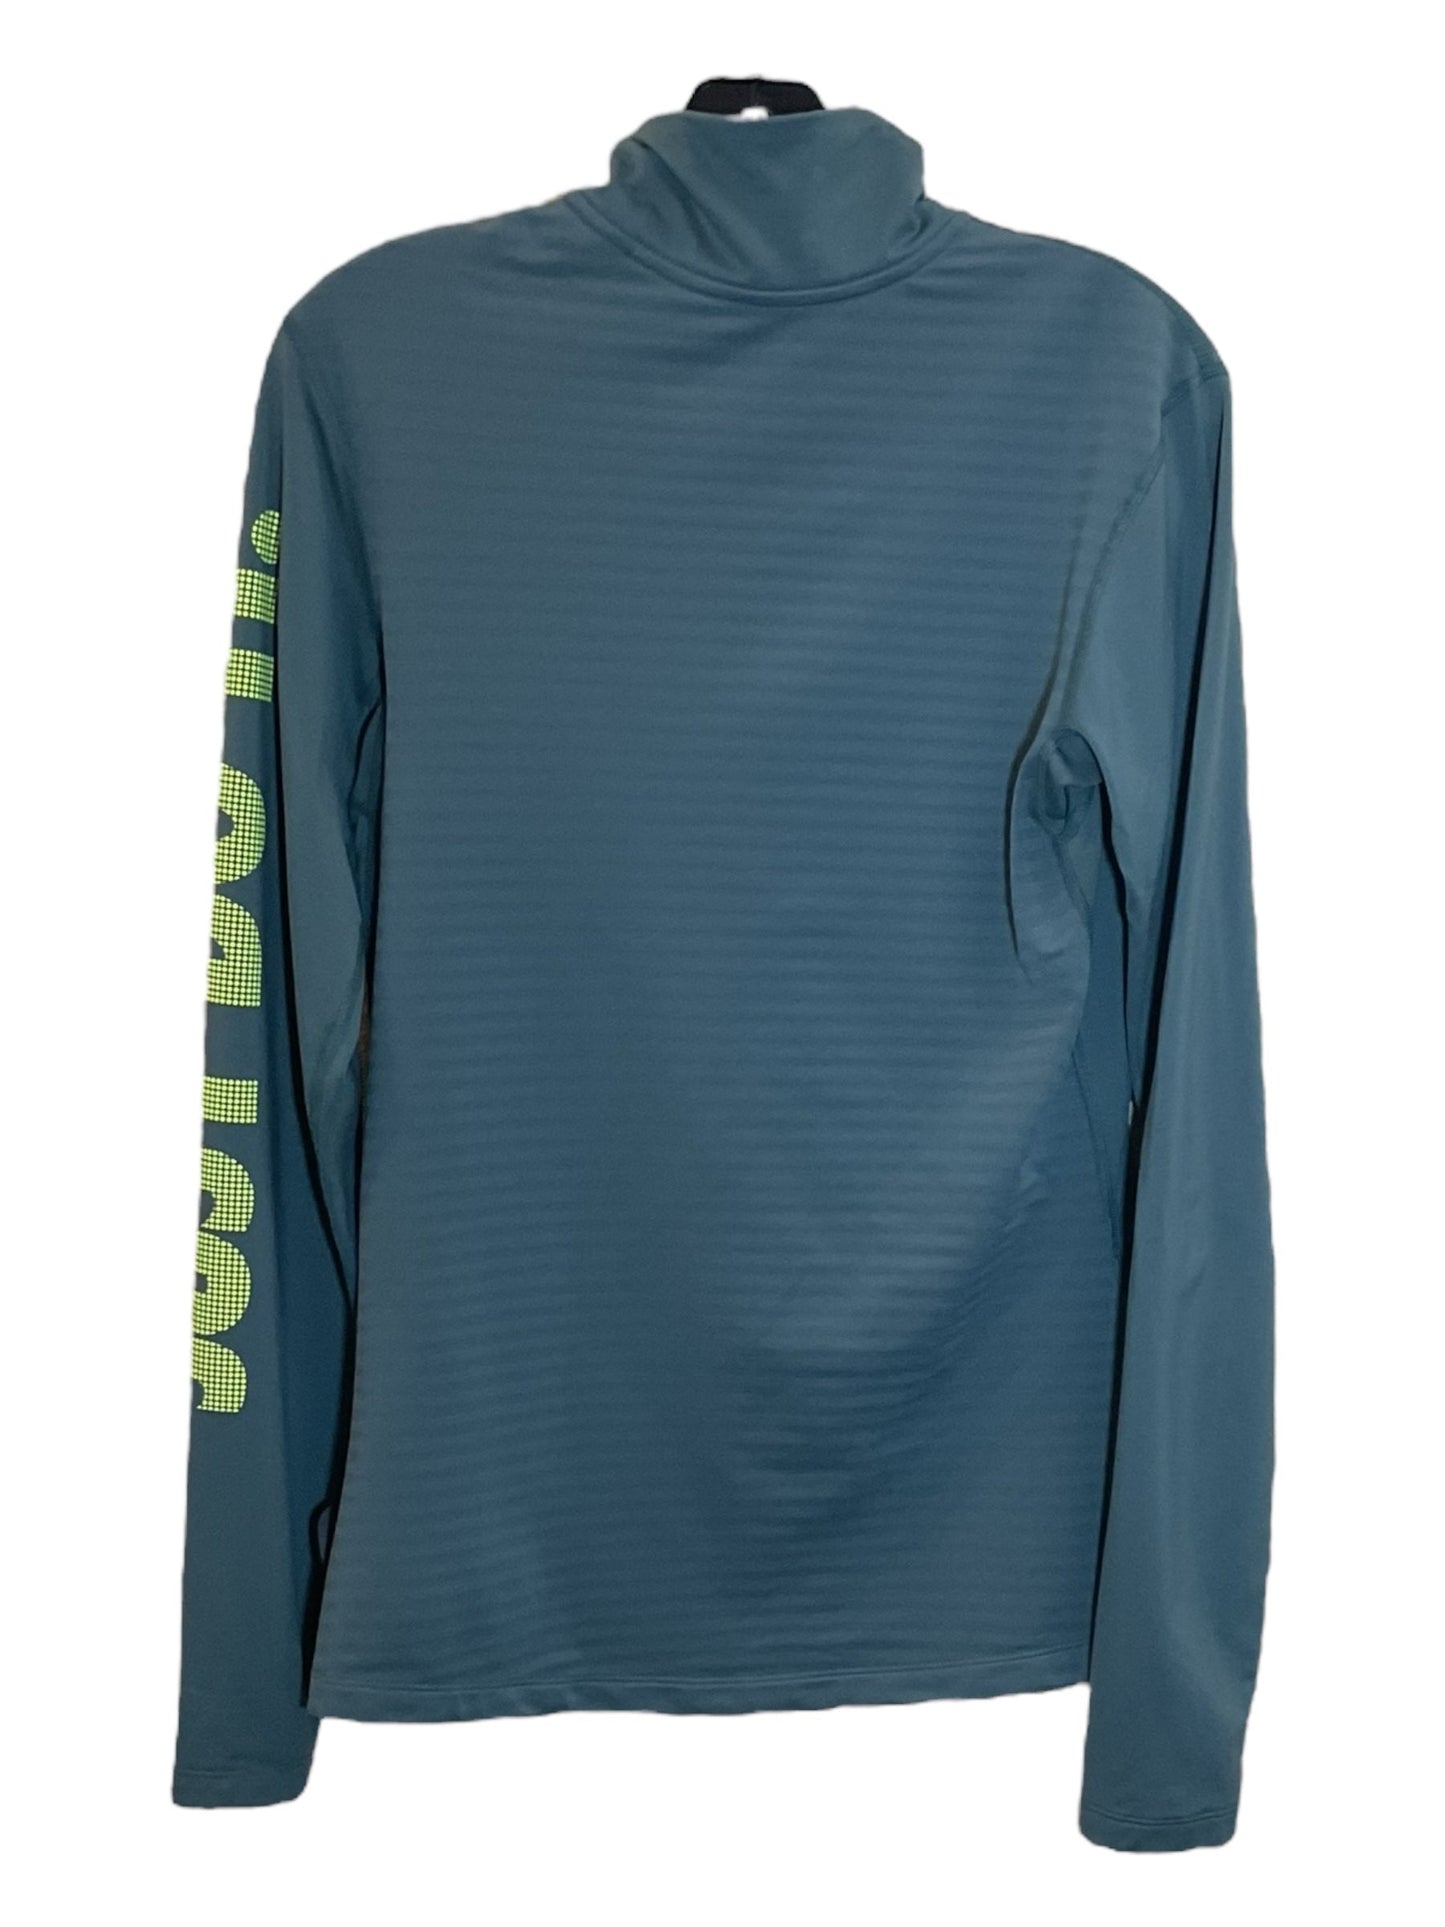 Green Athletic Top Long Sleeve Collar Nike Apparel, Size L